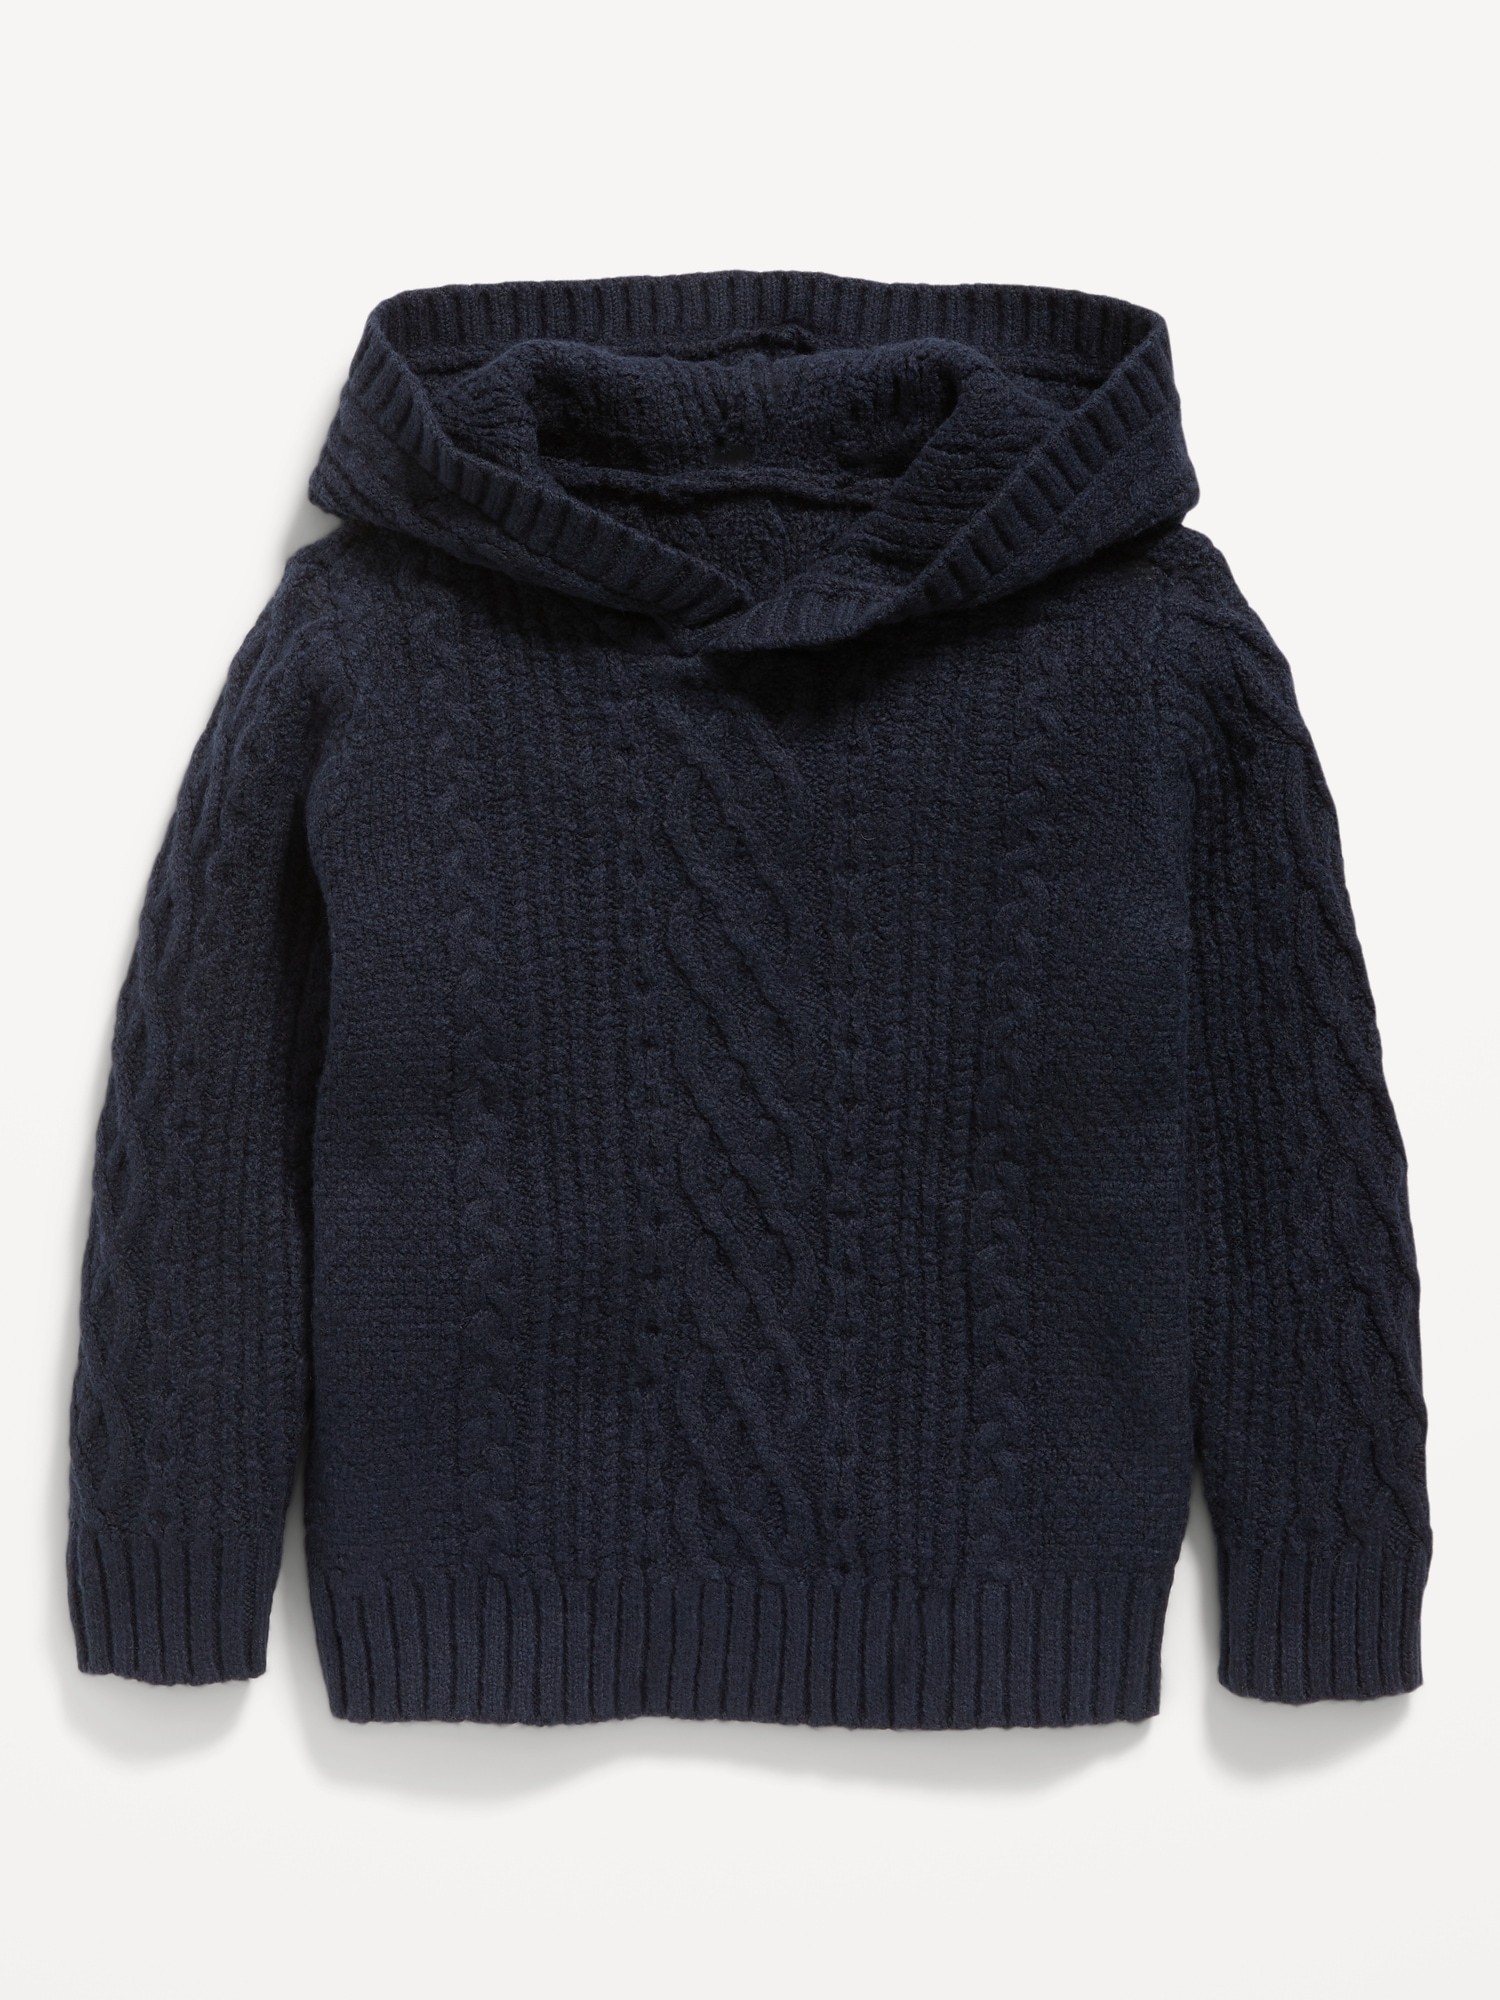 SoSoft Long-Sleeve Cable-Knit Hoodie for Toddler Boys | Old Navy